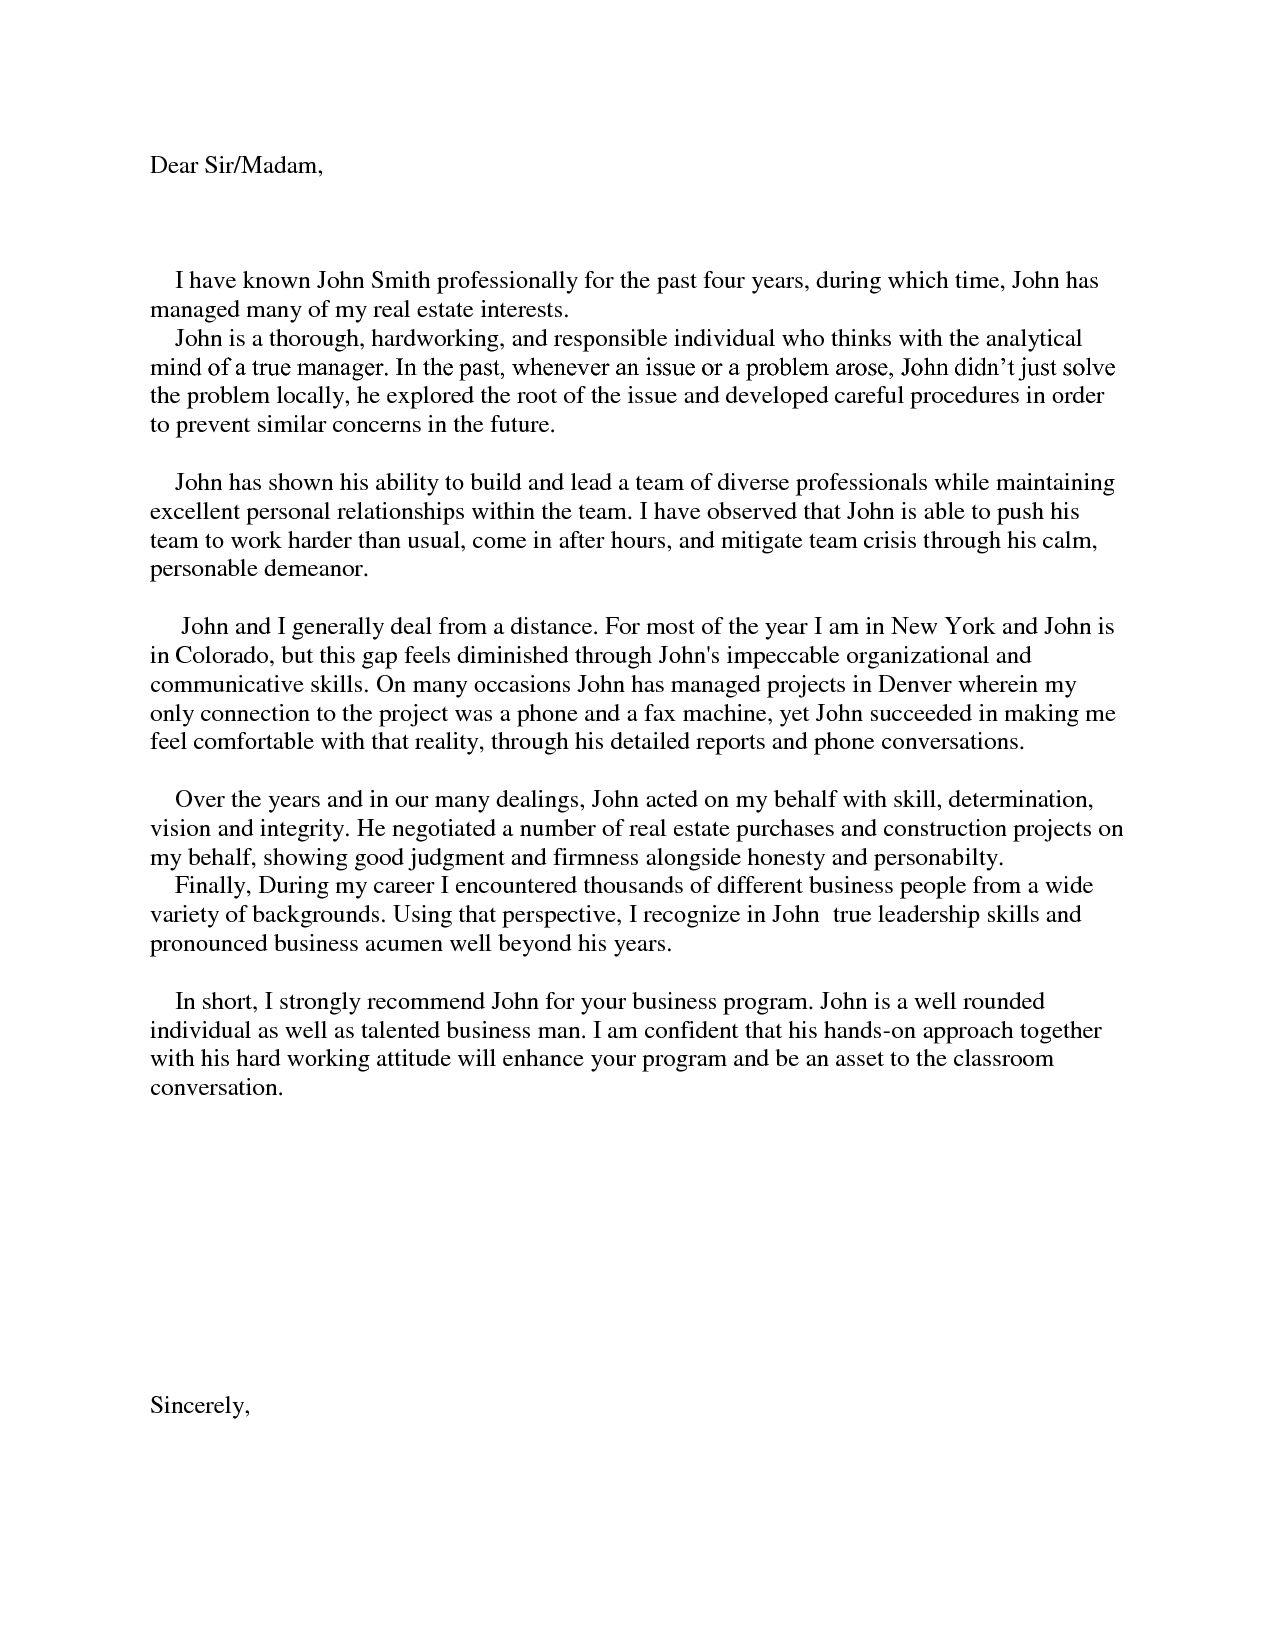 Sample Letter Of Recommendation For Business School Gallery throughout dimensions 1275 X 1650